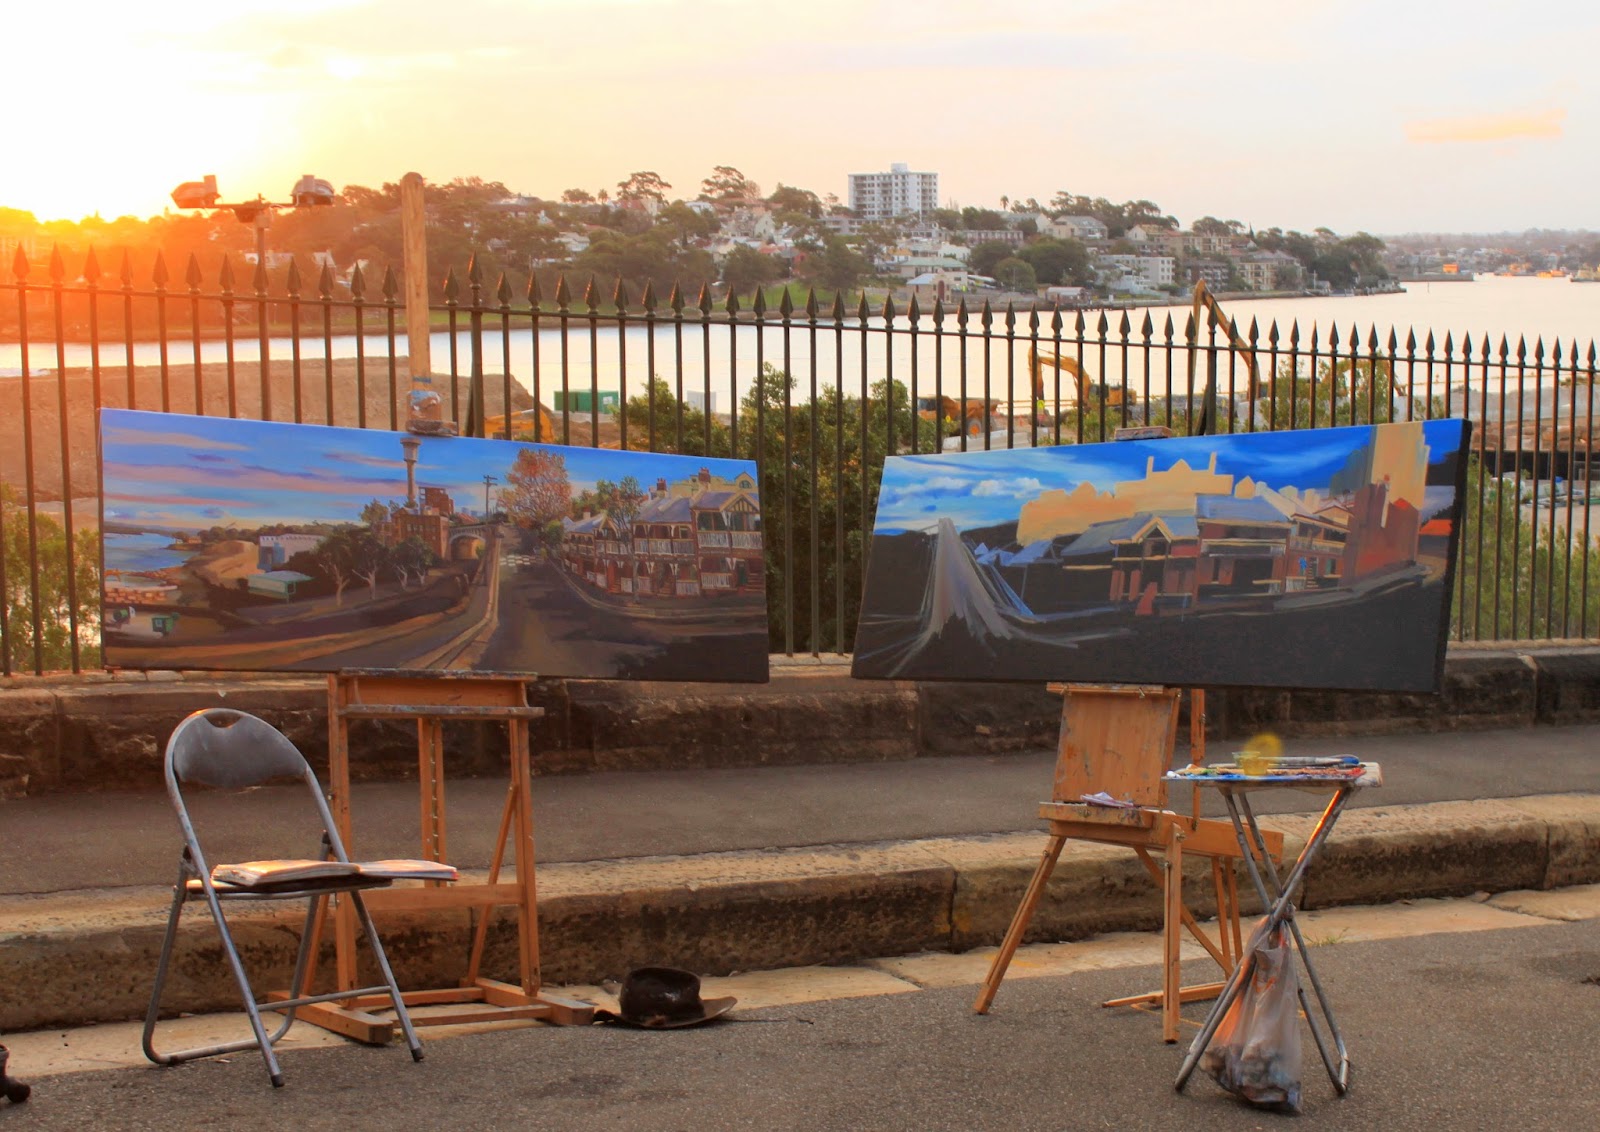 Plein air oil painting by Industrial Heritage Artist Jane Bennett of Millers Point Barangaroo and the Harbour Tower from High st